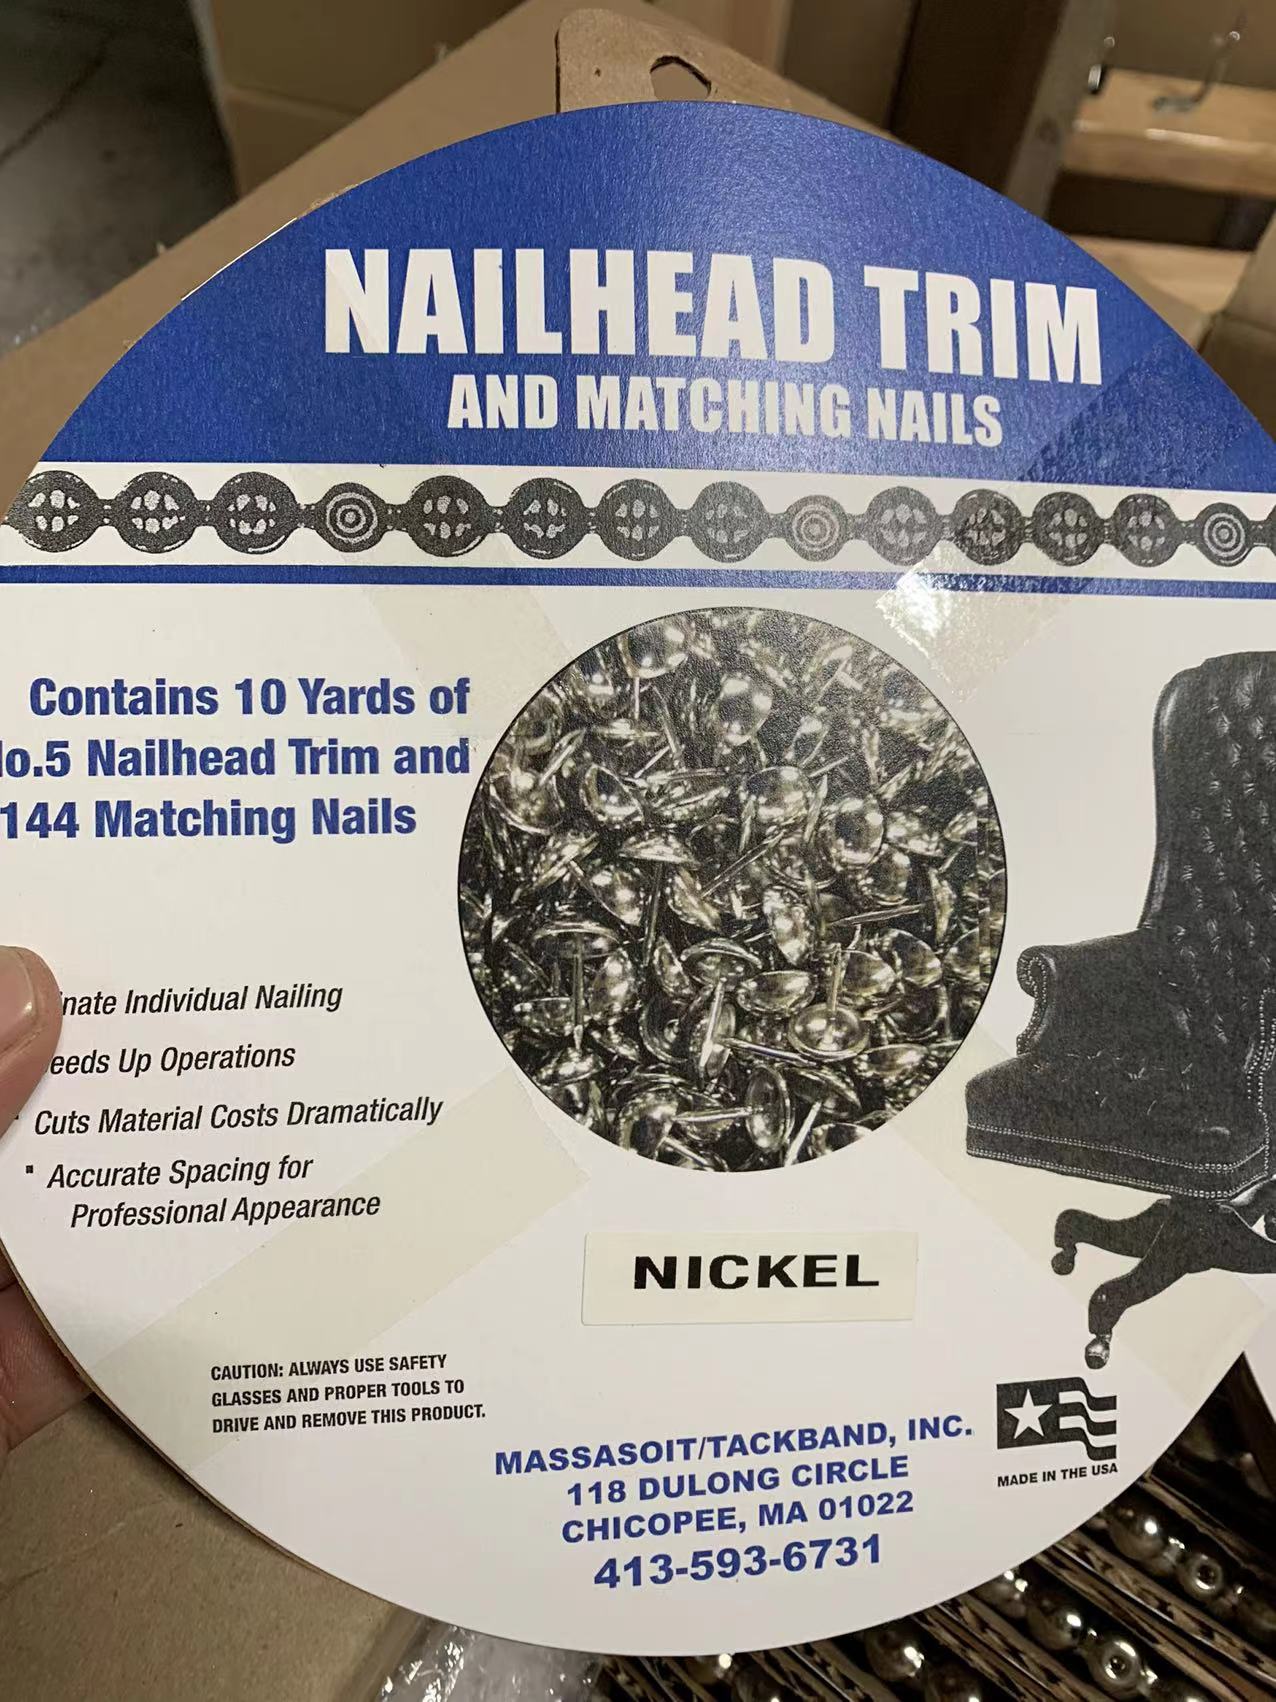 Nailhead Trim with Matching Nails 10 Yards with 144 Nails